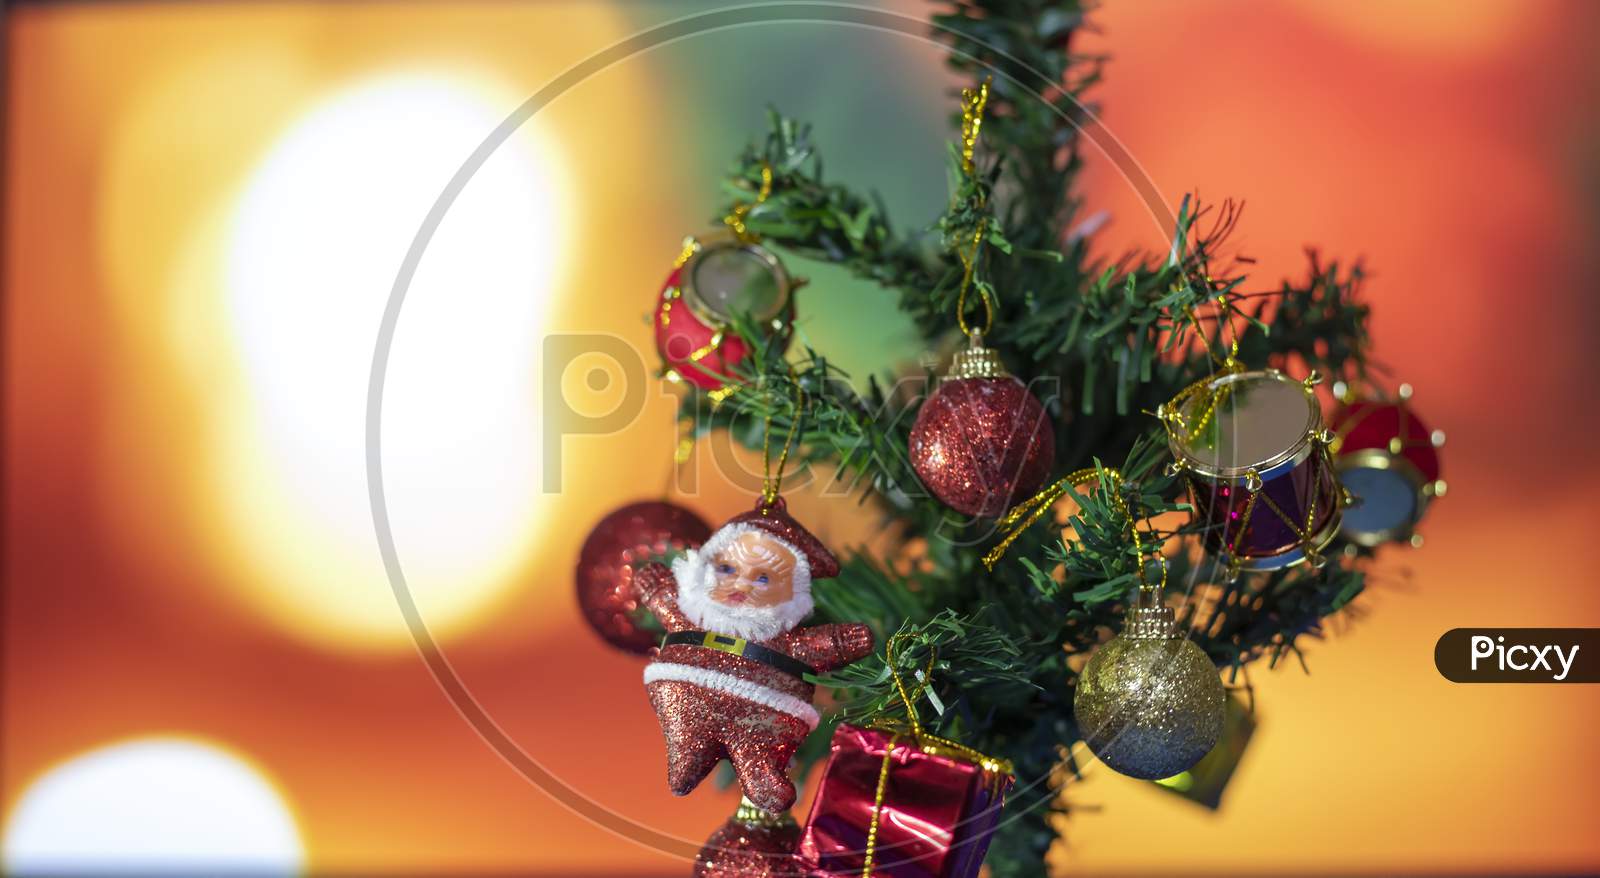 Decorated Christmas Tree On Blurred Background. Christmas Ornament Hanging On The Tree